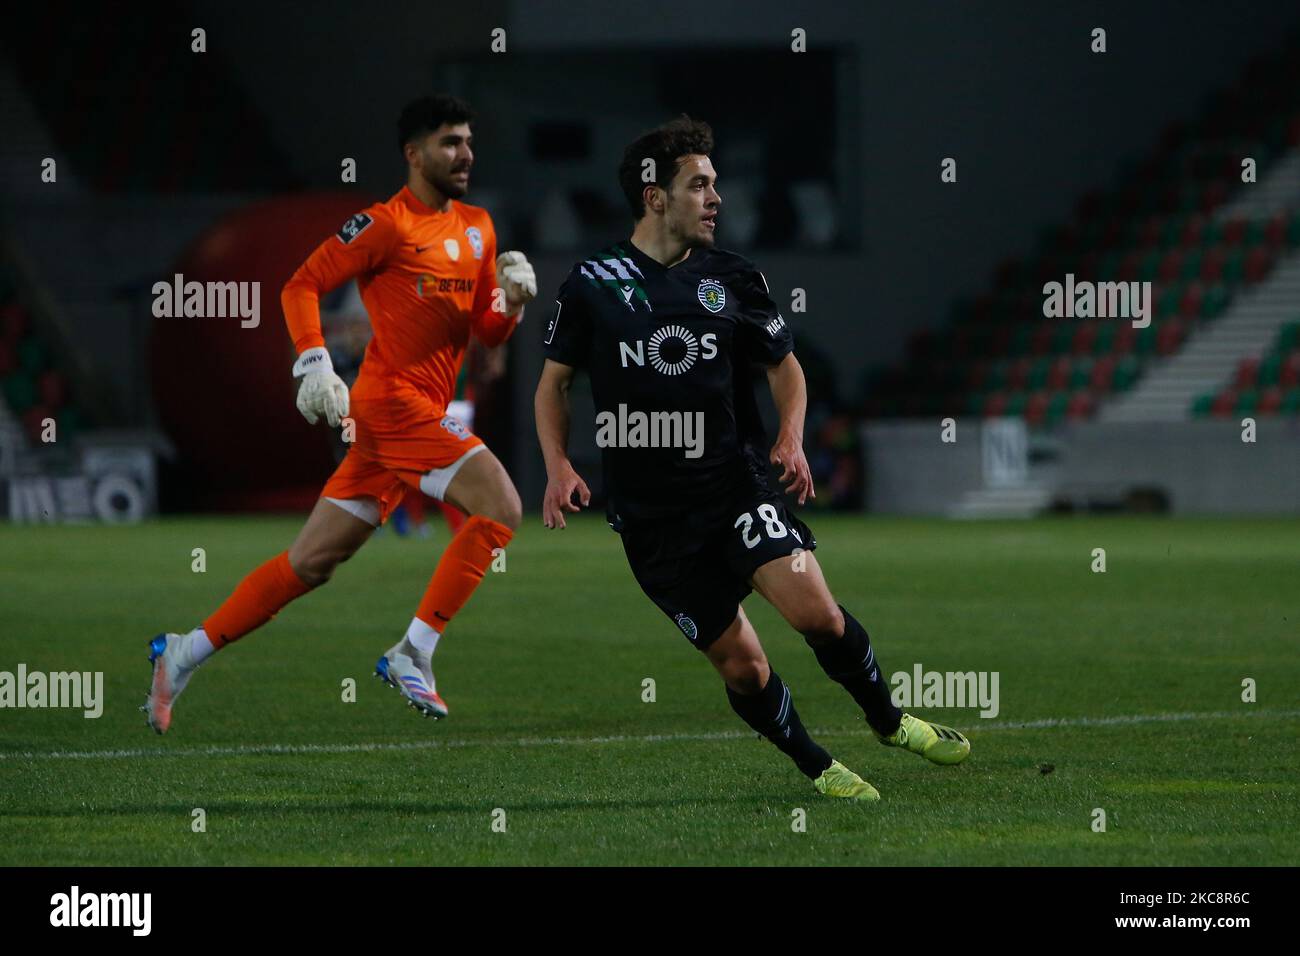 Pedro Gonçalves midfielder of Sporting CP looks on during the Liga Nos match between CS Maritimo and Sporting SP at Estádio do Maritimo on February 05, 2021 in Funchal, Madeira, Portugal. (Photo by Valter Gouveia/NurPhoto) Stock Photo